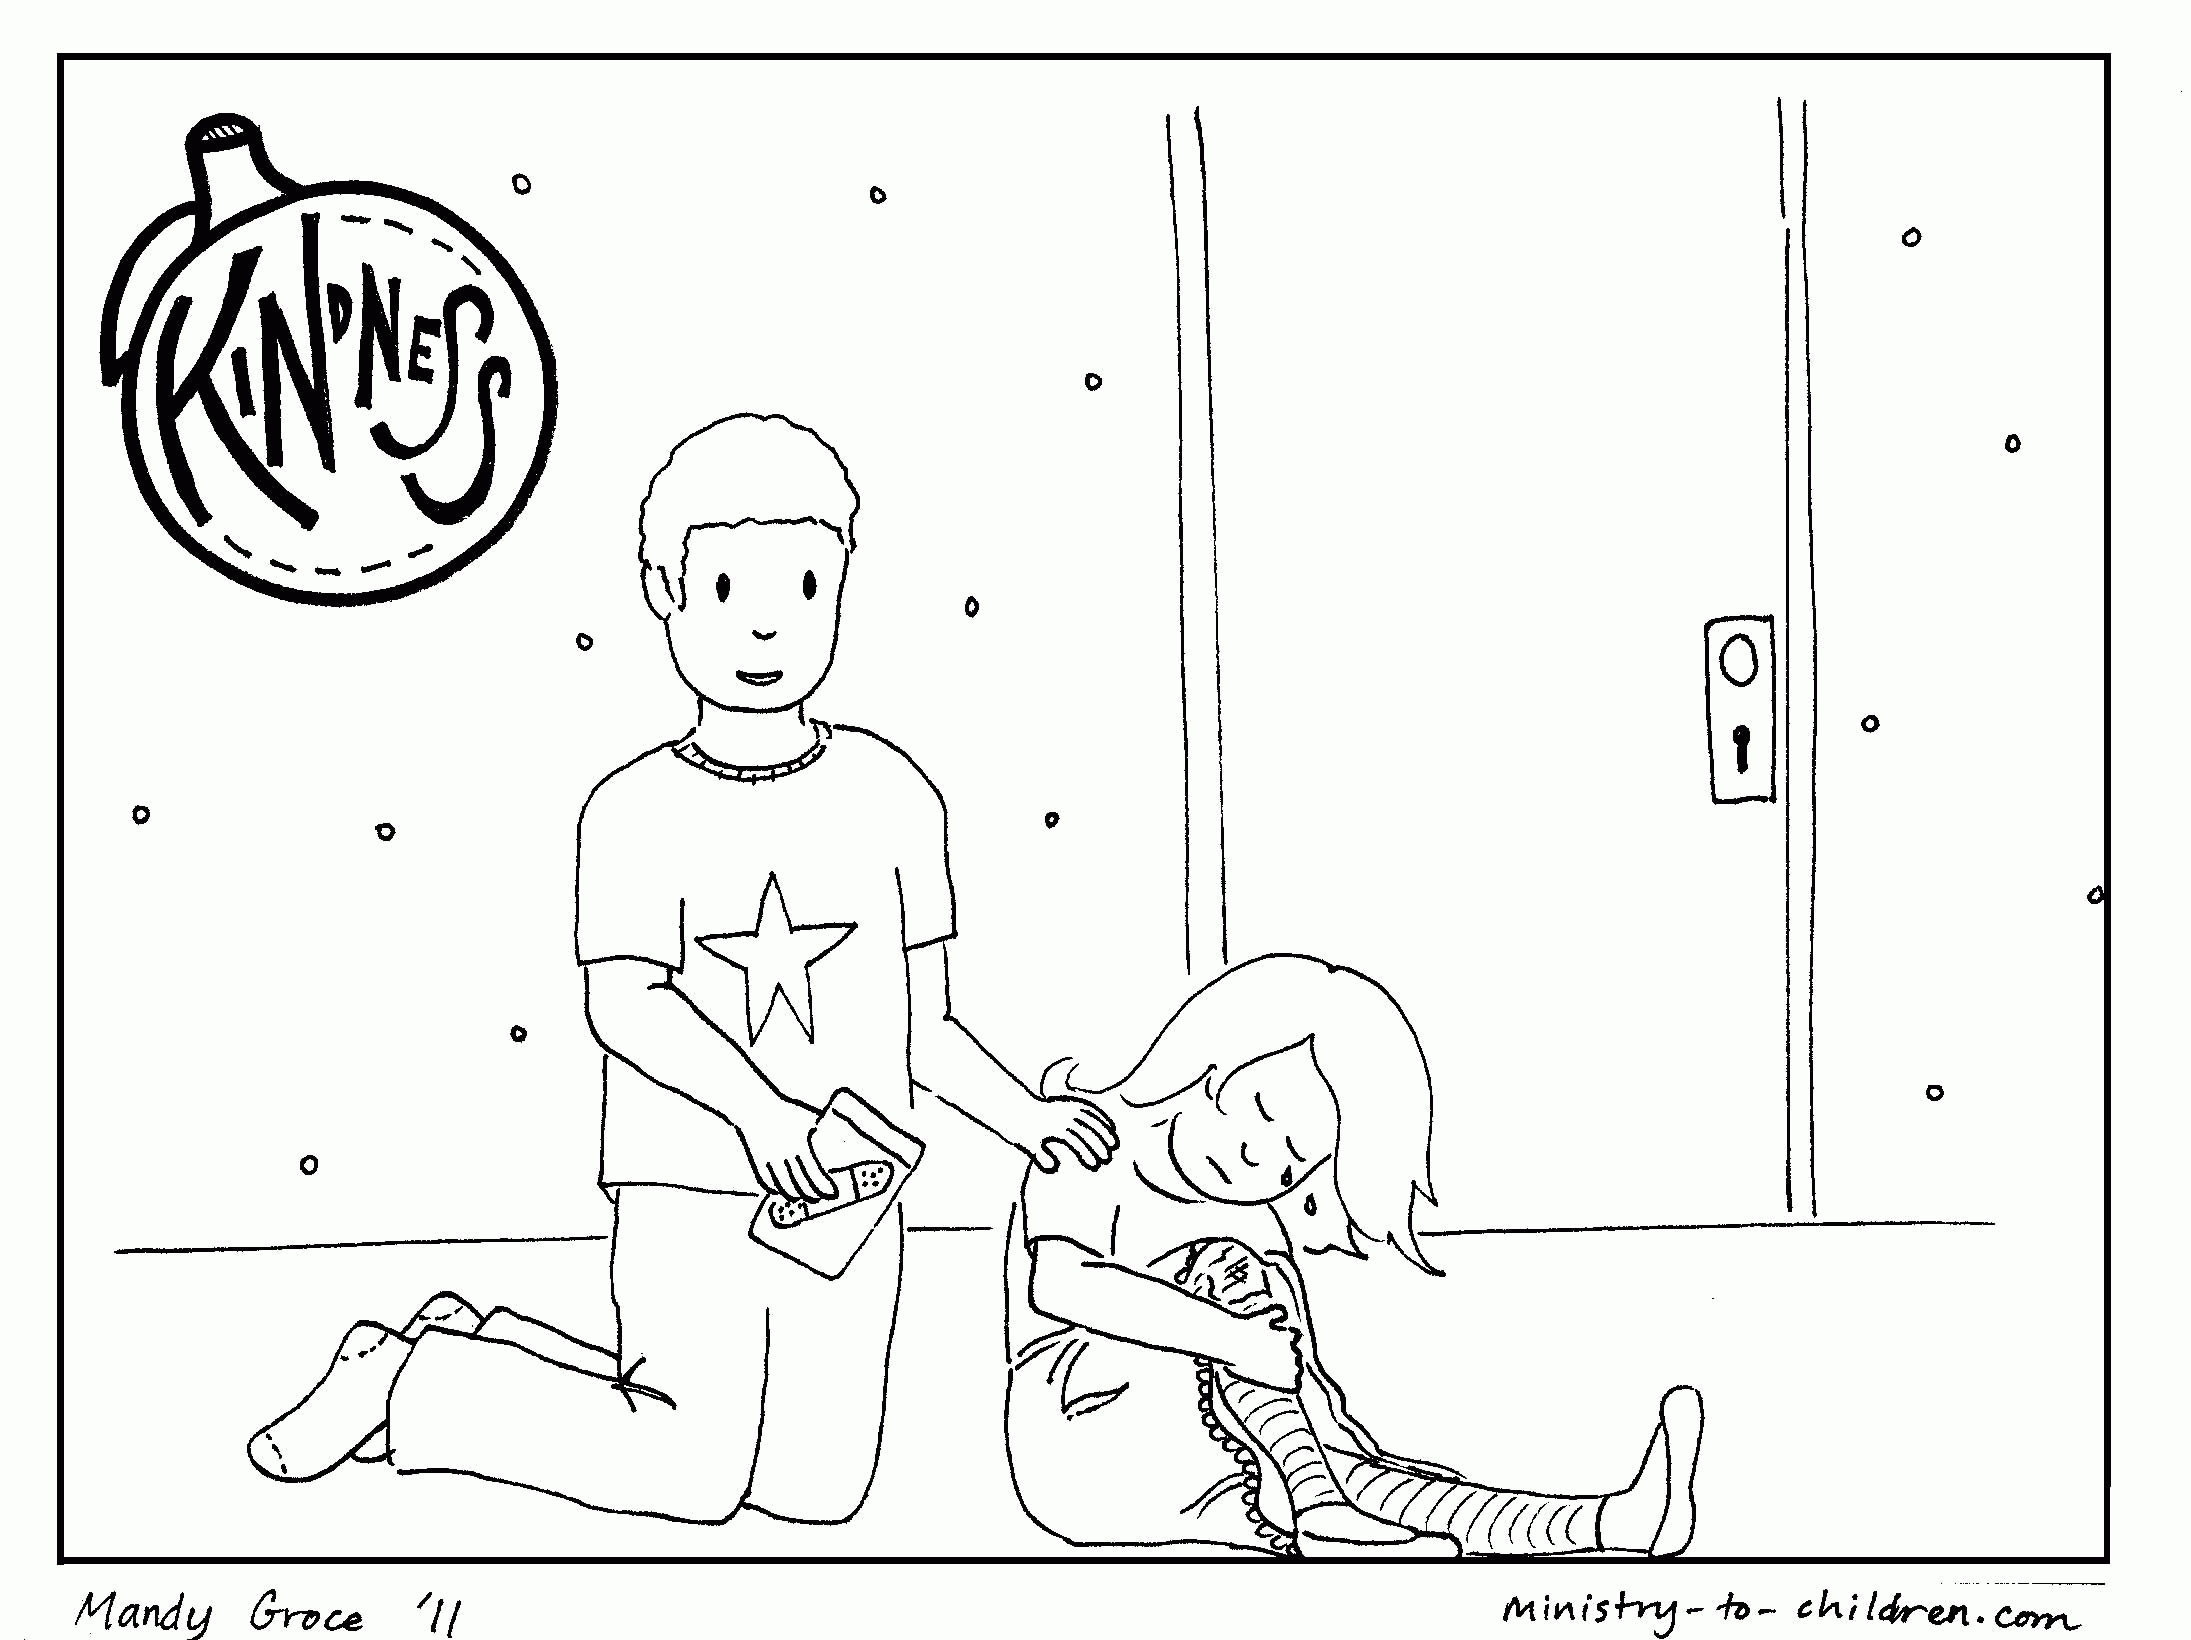 Kindness Coloring Pages (free printable for kids)